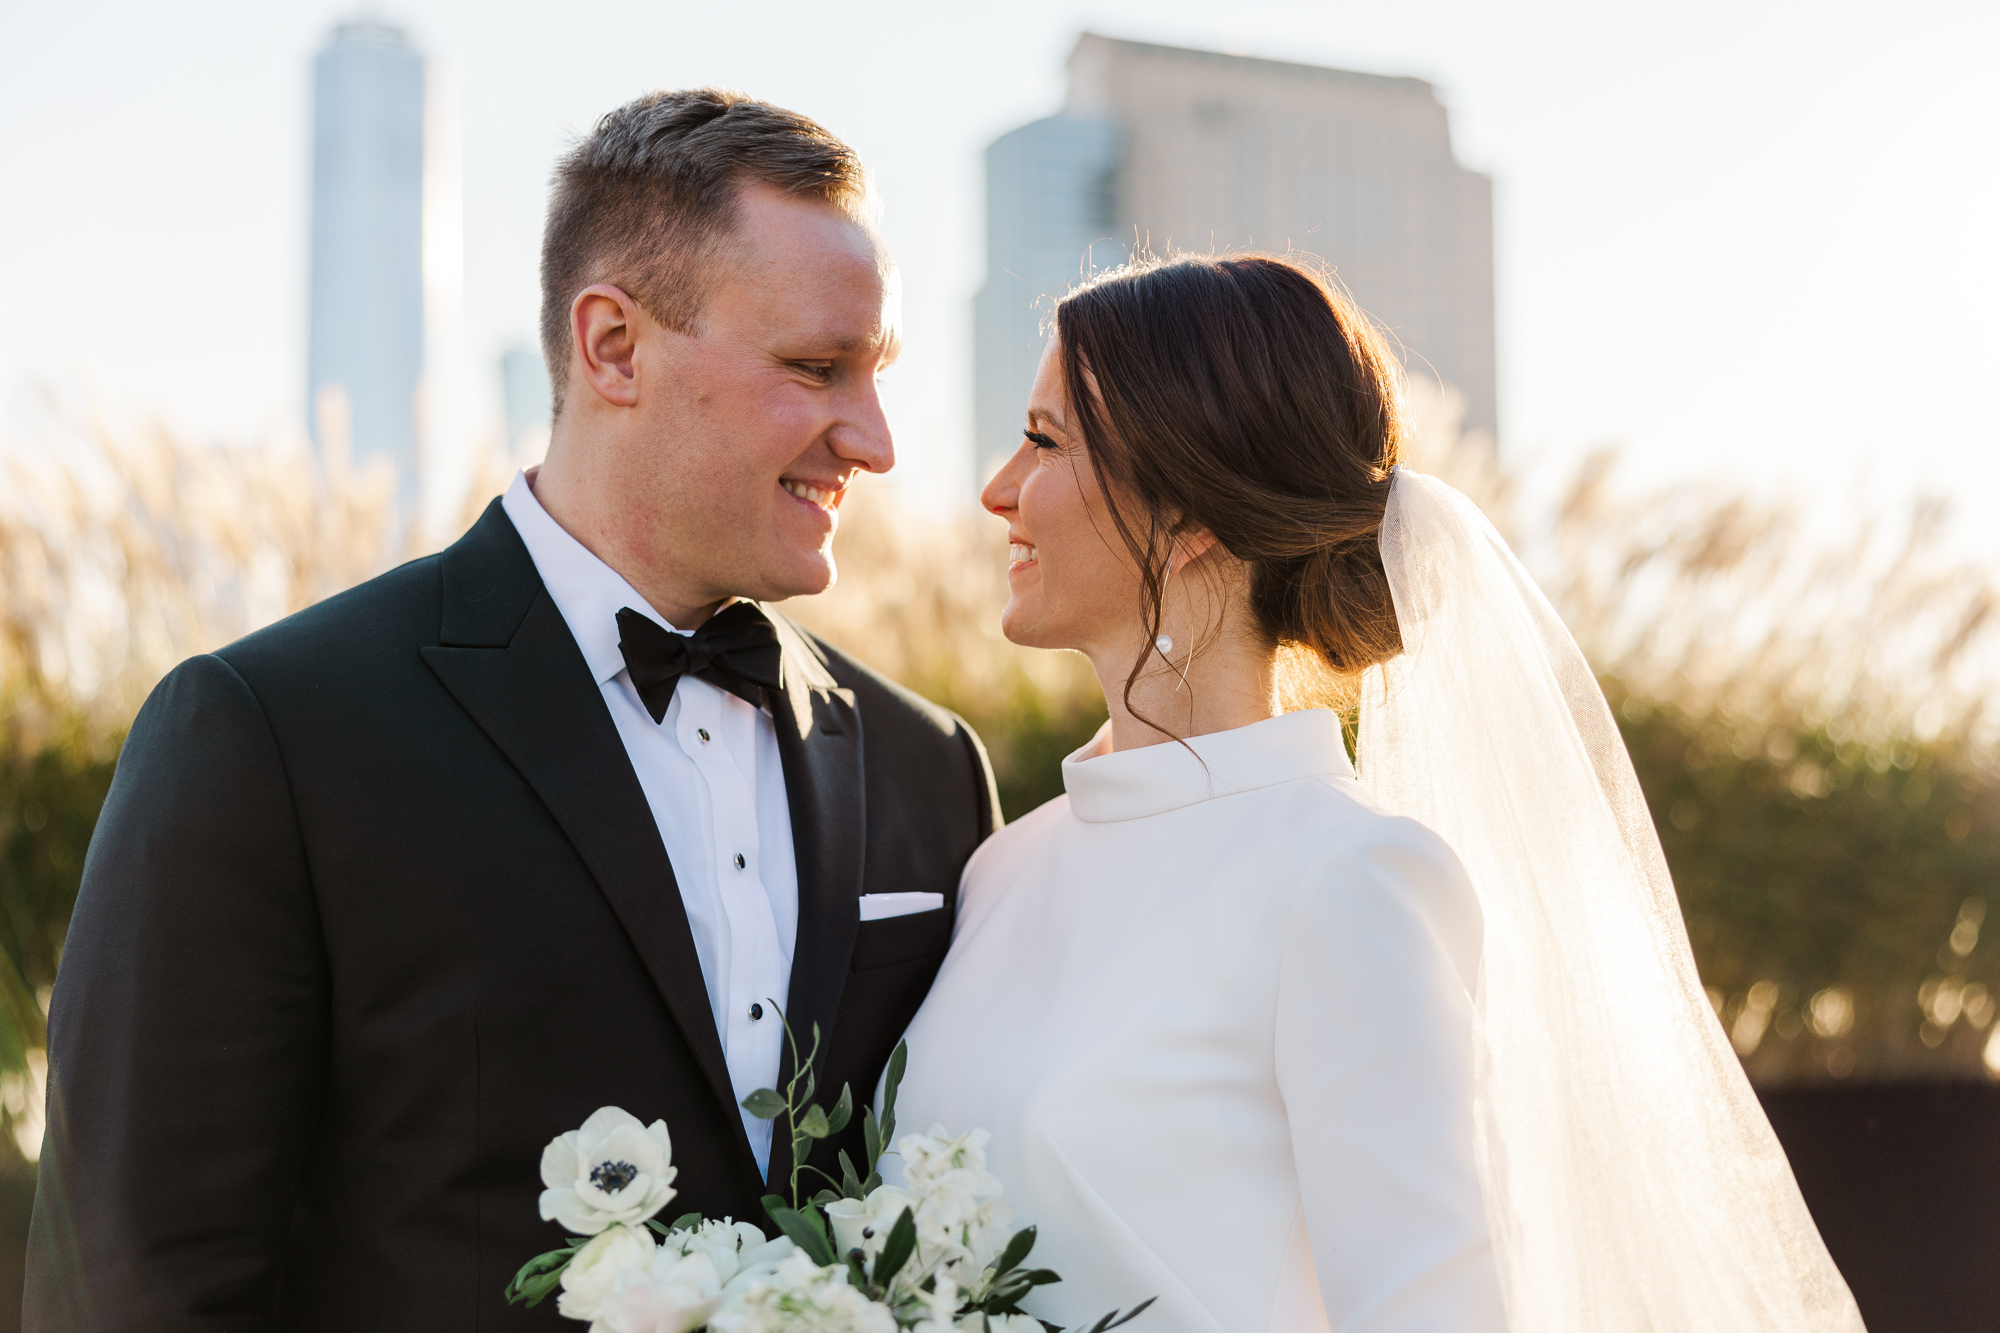 Candid and romantic Wedding Reception Photos at Tribeca Rooftop